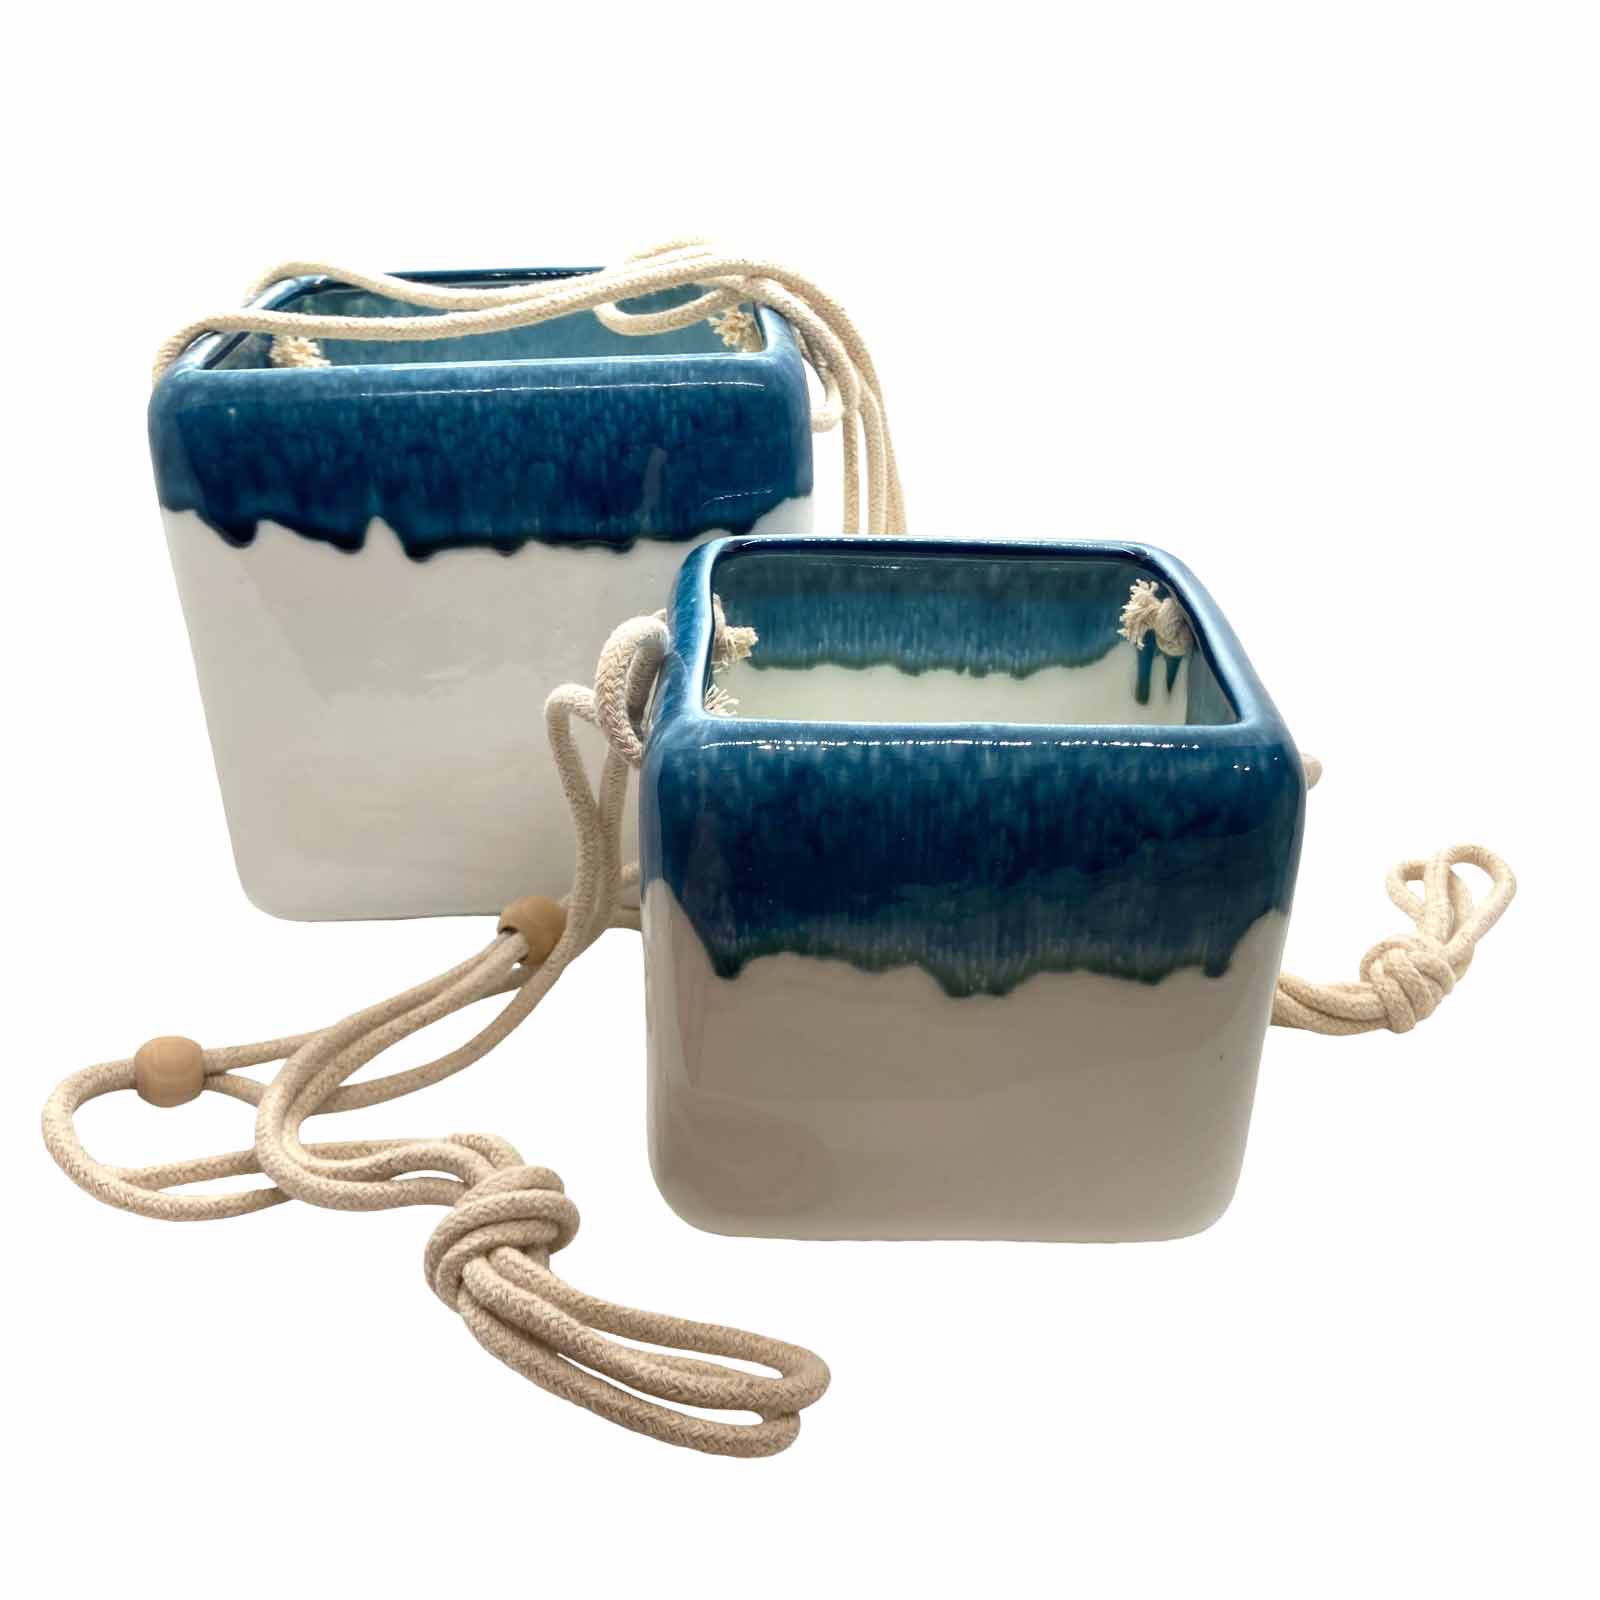 Ceramic Drip Glaze Hanging Planters - Large and Small